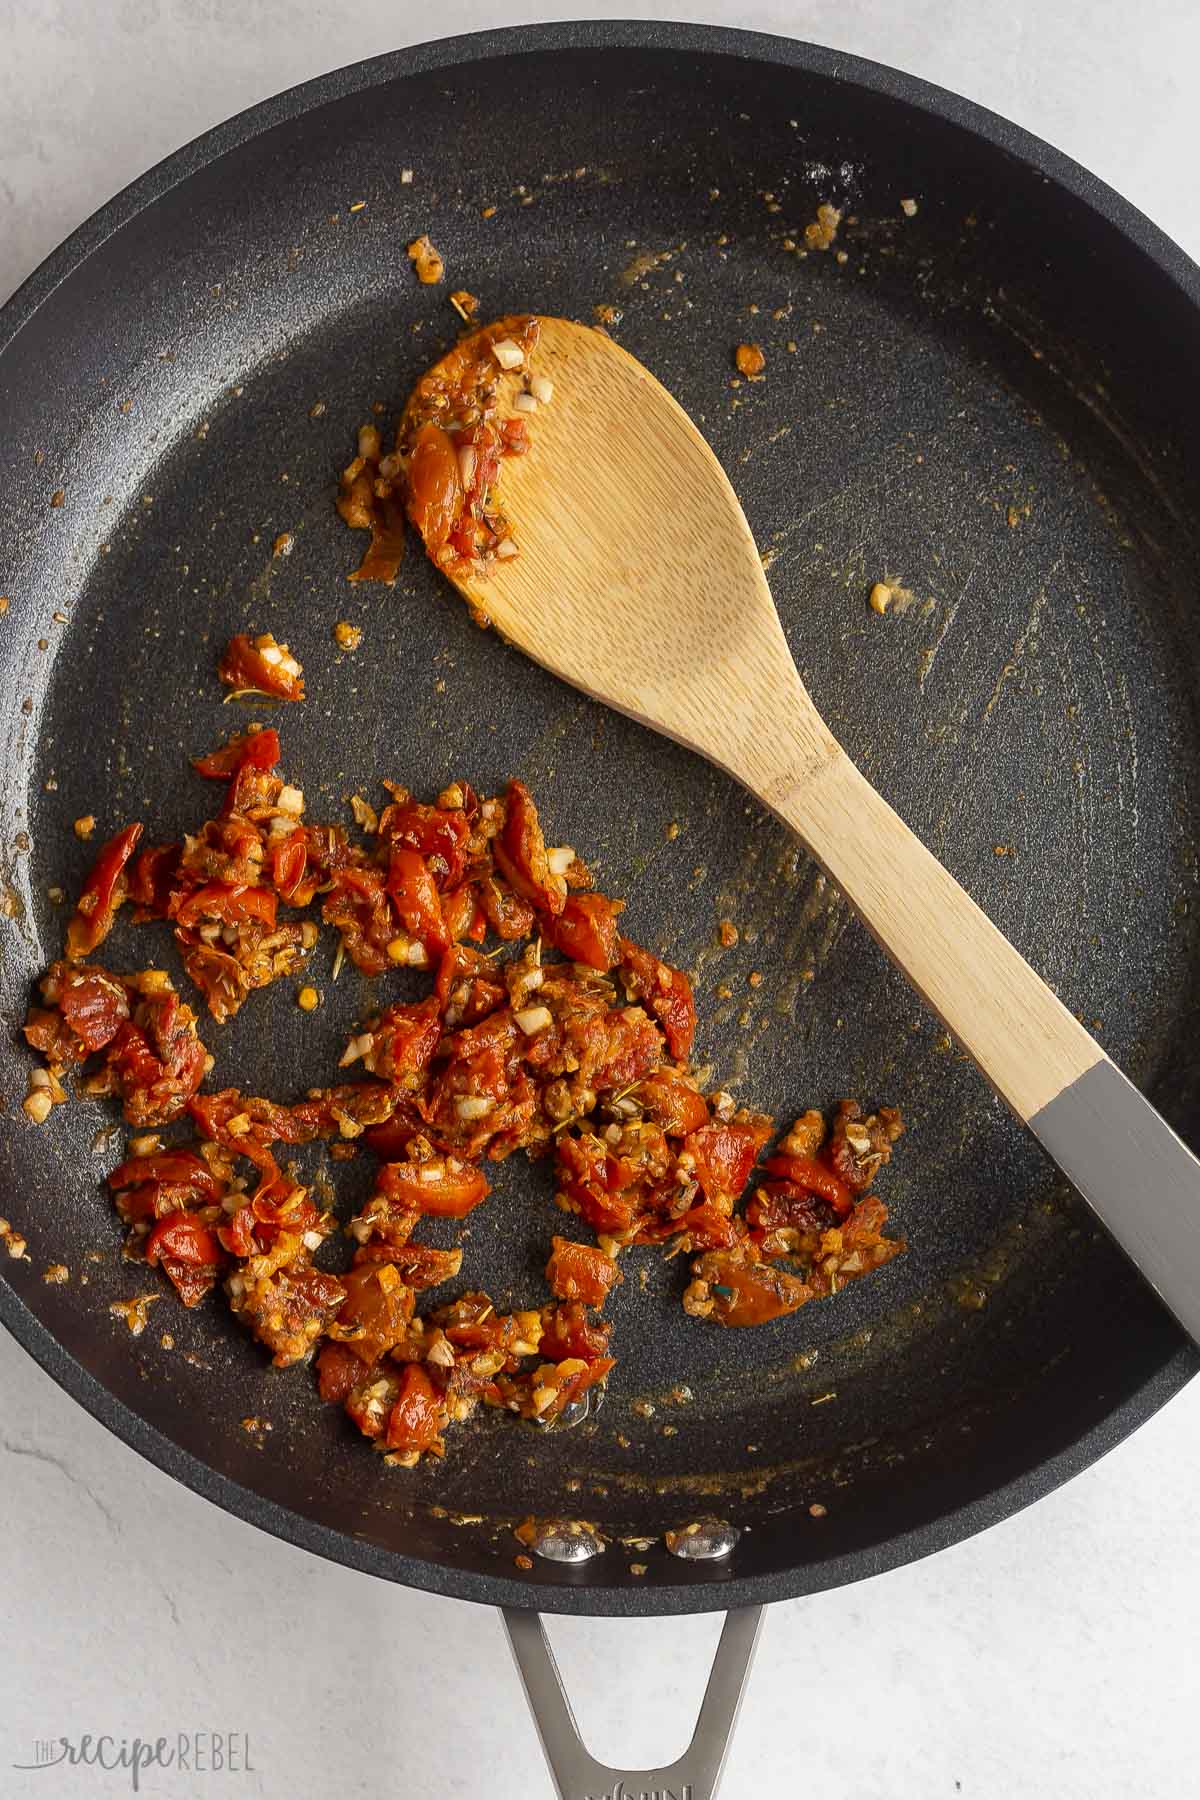 sun dried tomatoes and spices sauteeing in skillet